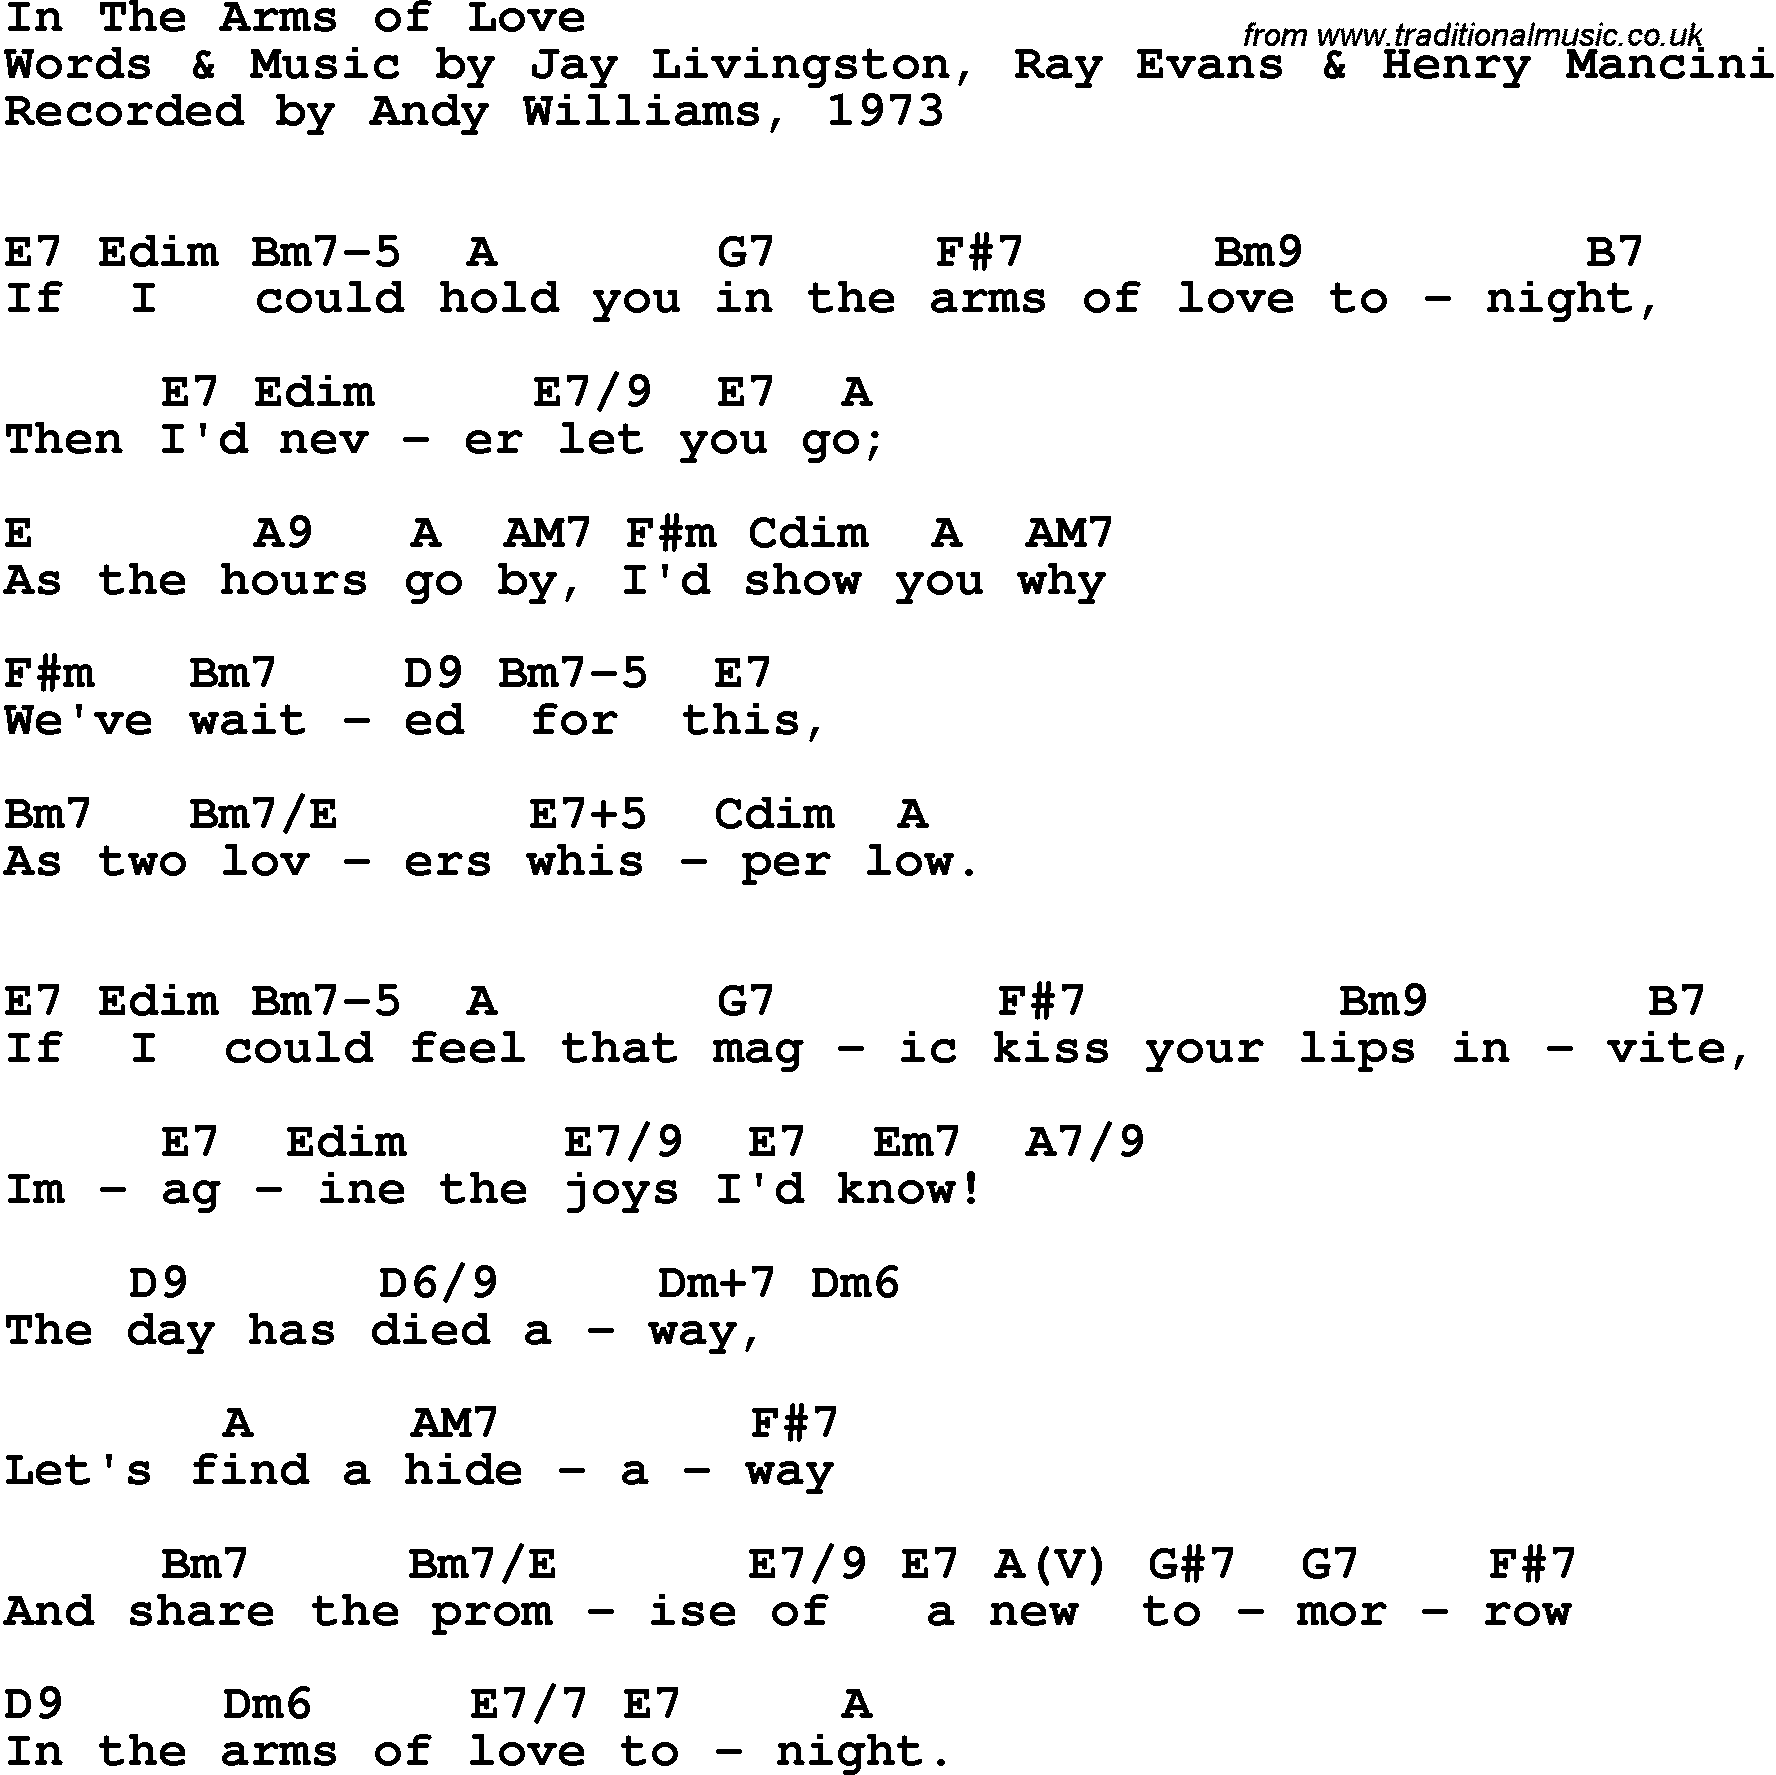 Song Lyrics with guitar chords for In The Arms Of Love - Andy Williams, 1973